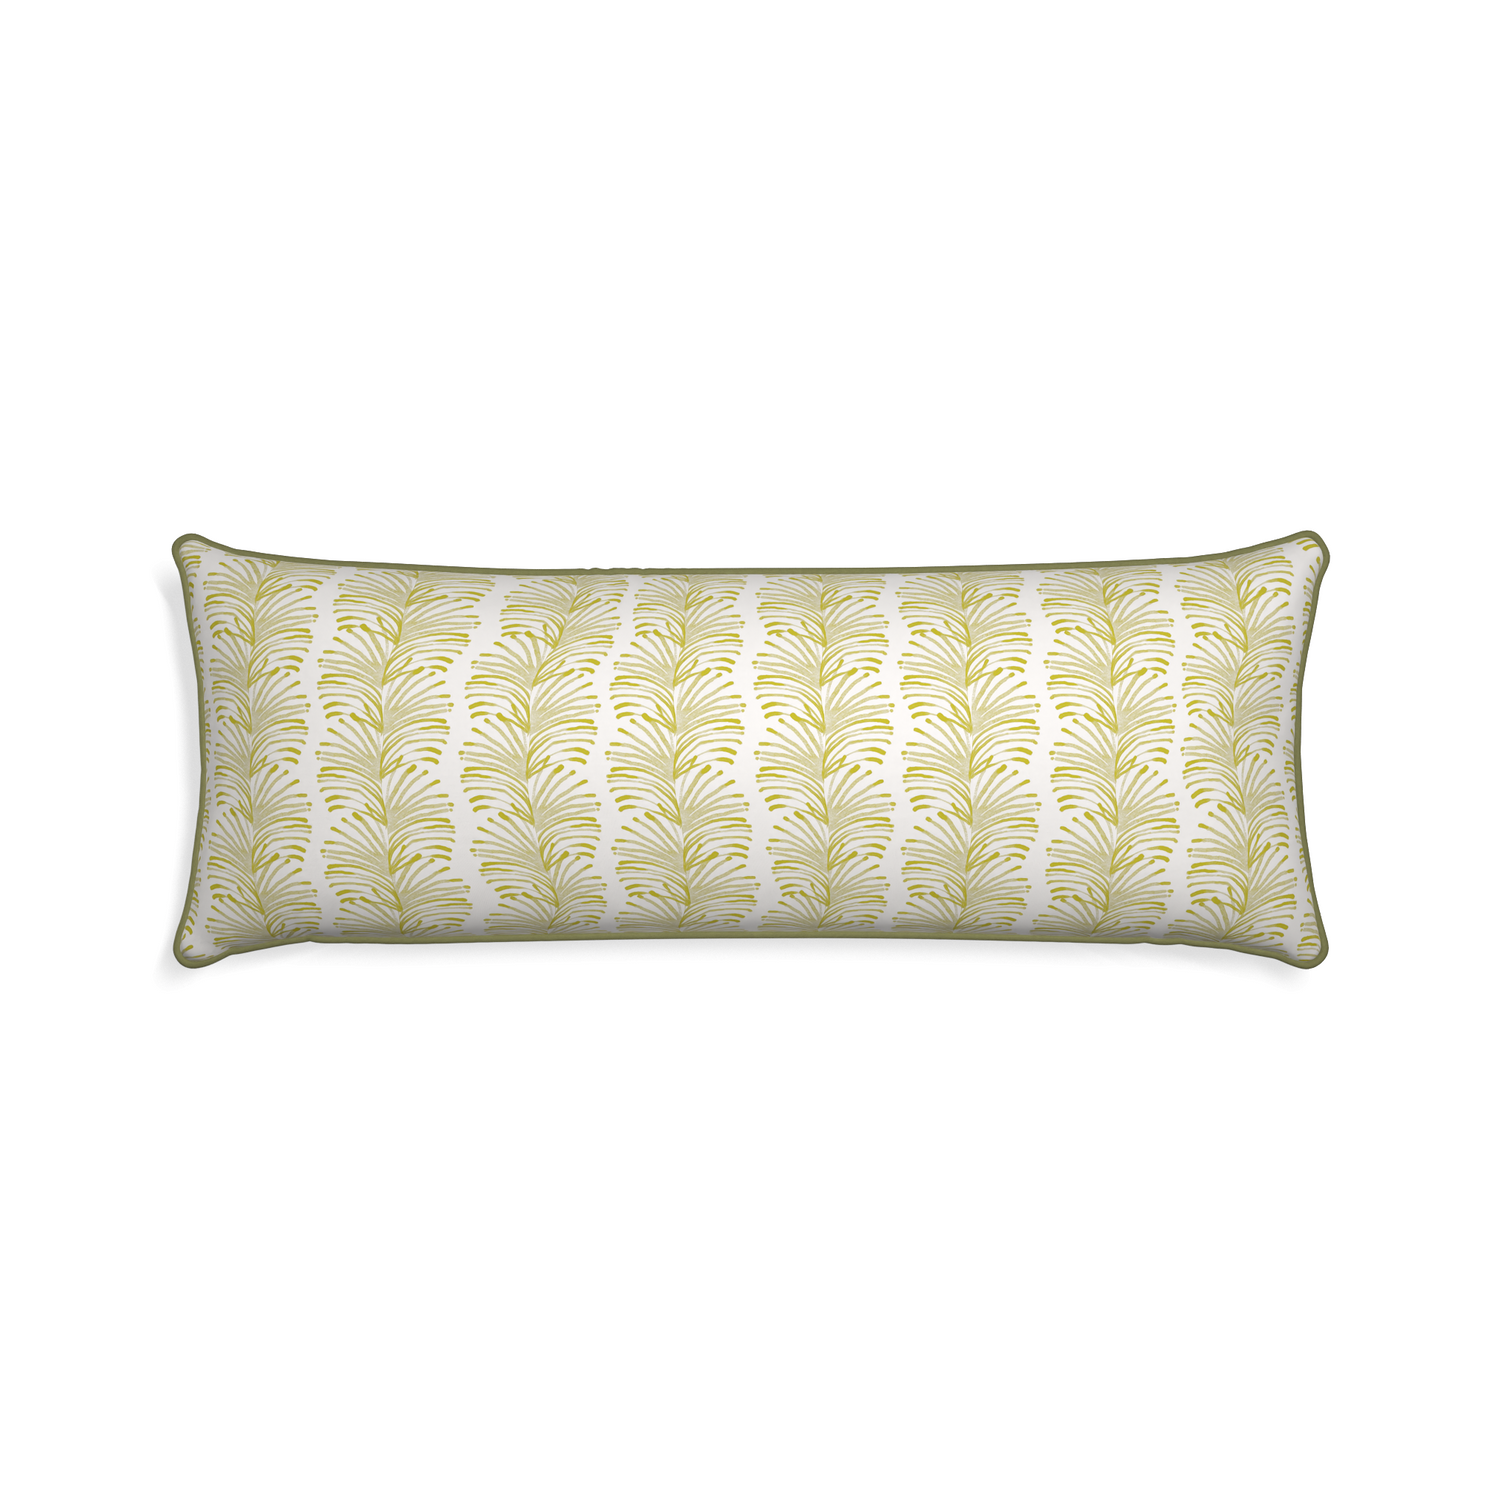 Xl-lumbar emma chartreuse custom pillow with moss piping on white background